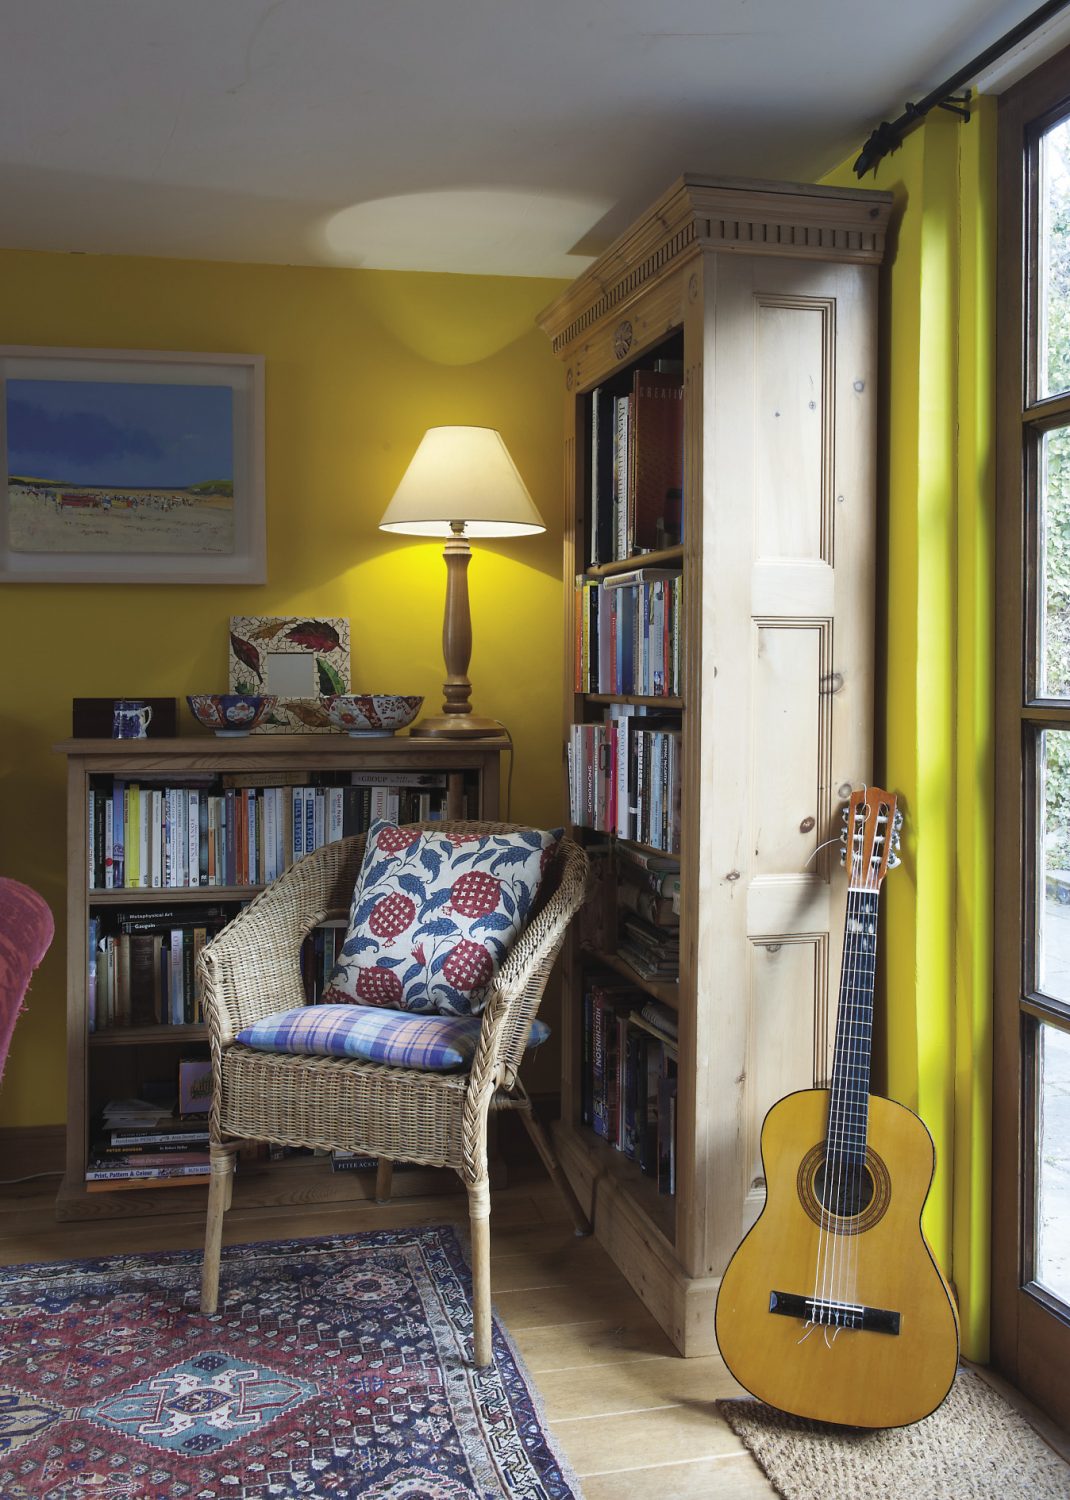 An accoustic guitar propped in one corner alludes to Oliver’s phenomenal music collection